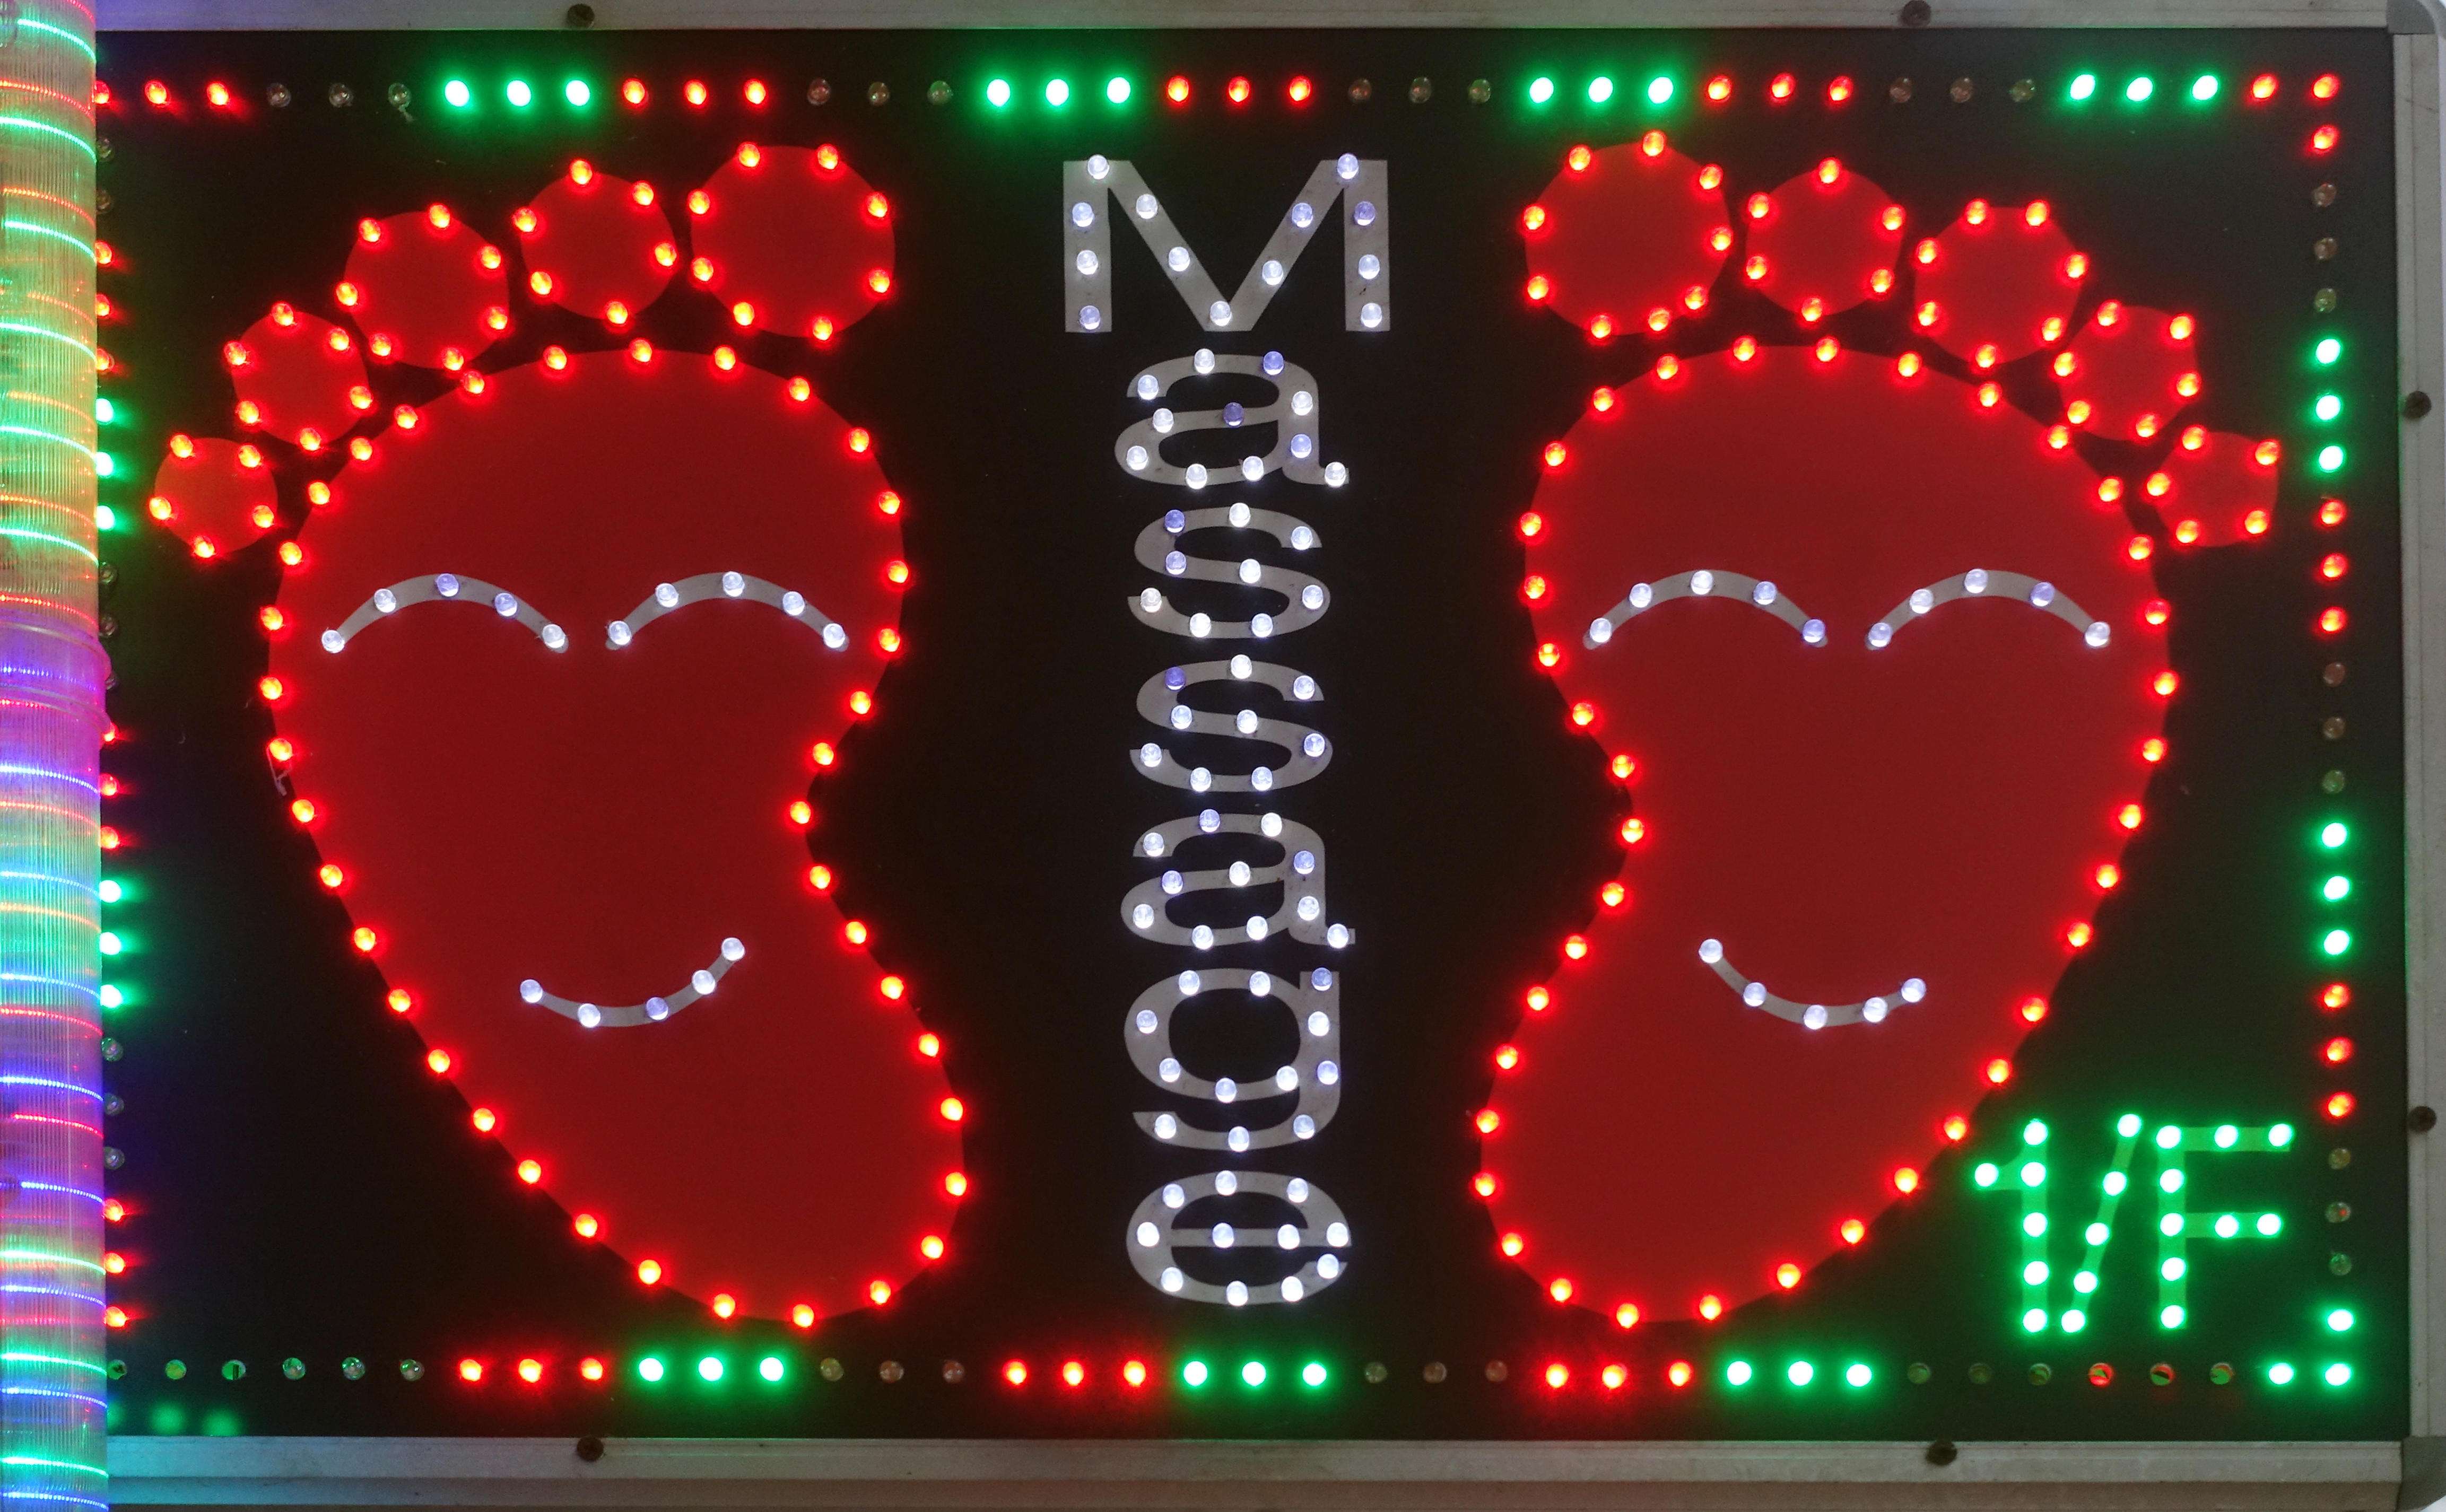 Cheap and cheerful seems to be the message this neon sign for foot massages in Hong Kong is conveying. Photo: Alamy